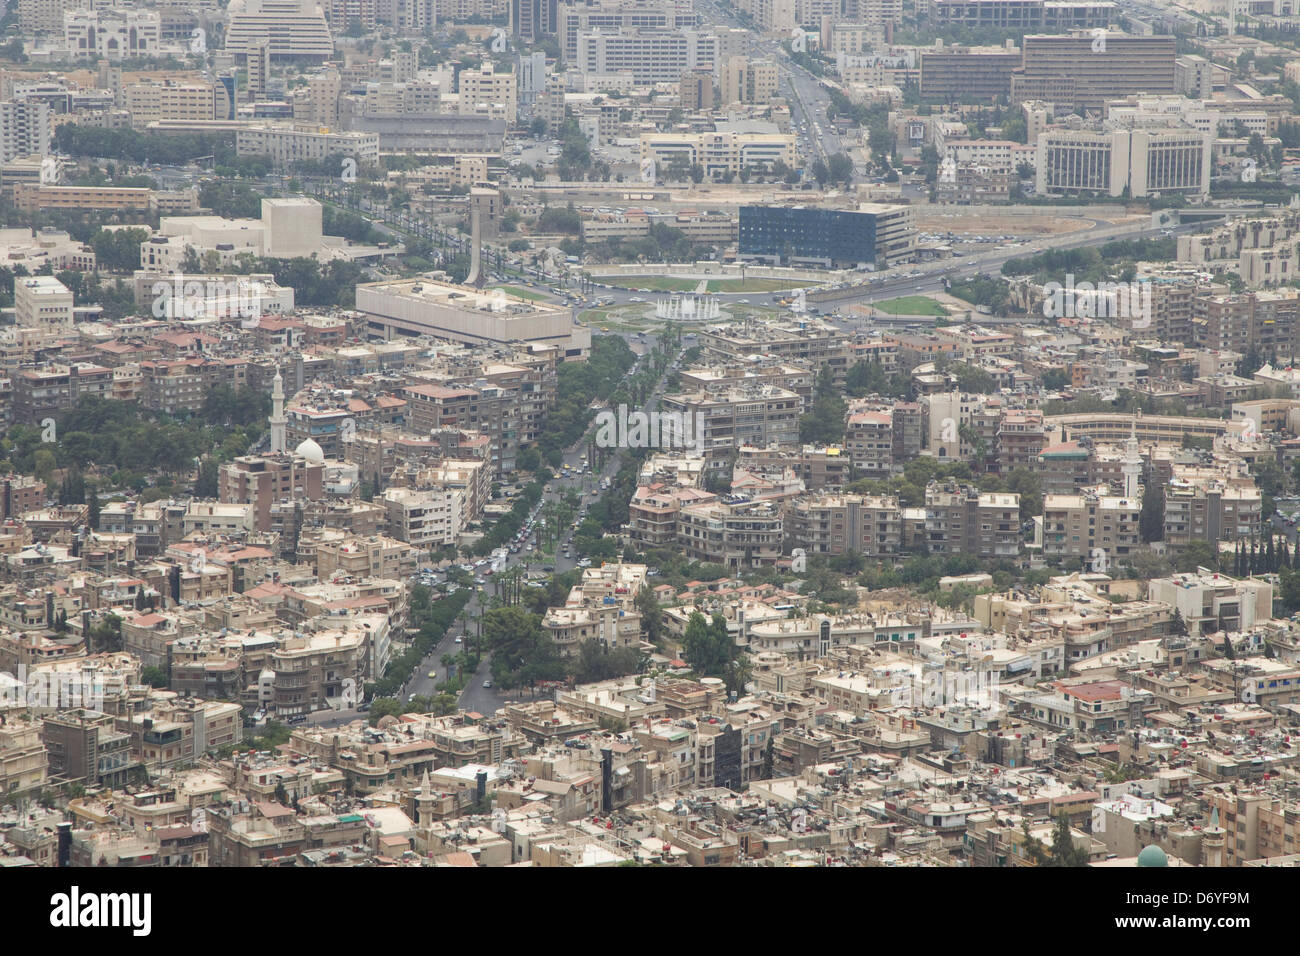 25th April 2013, Damascus, Syria - An aerial view of Damascus city before the Syrian uprising. It is unknown how much damage or destruction has occured in Damascus after the uprising started. Stock Photo